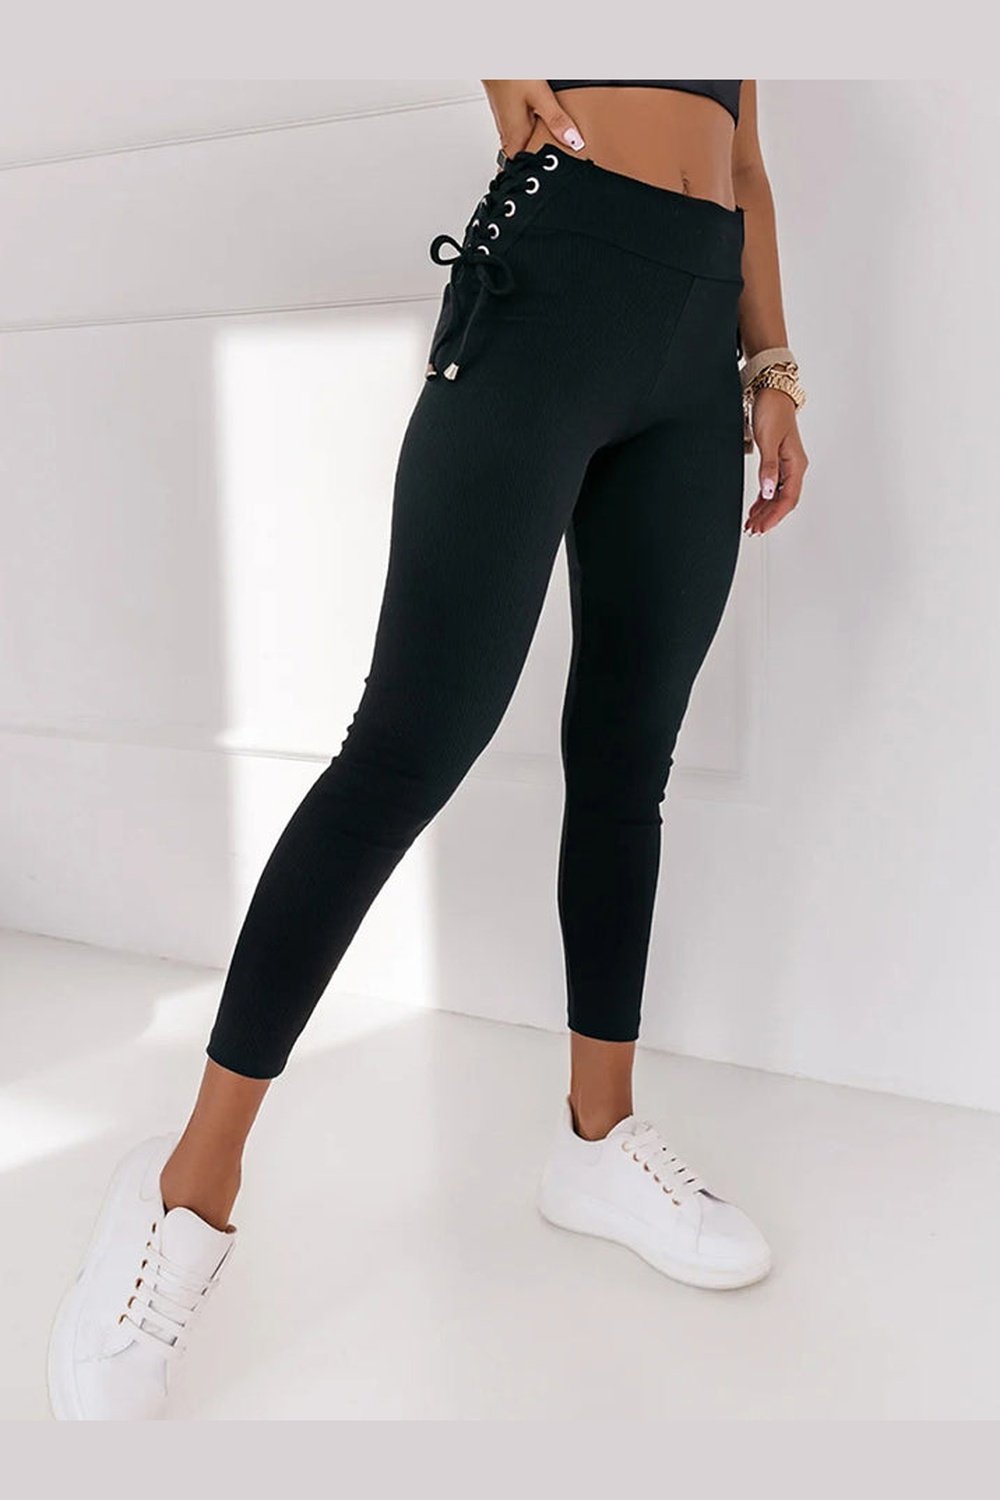 Wide Waistband Lace-Up Leggings - Leggings - FITGGINS